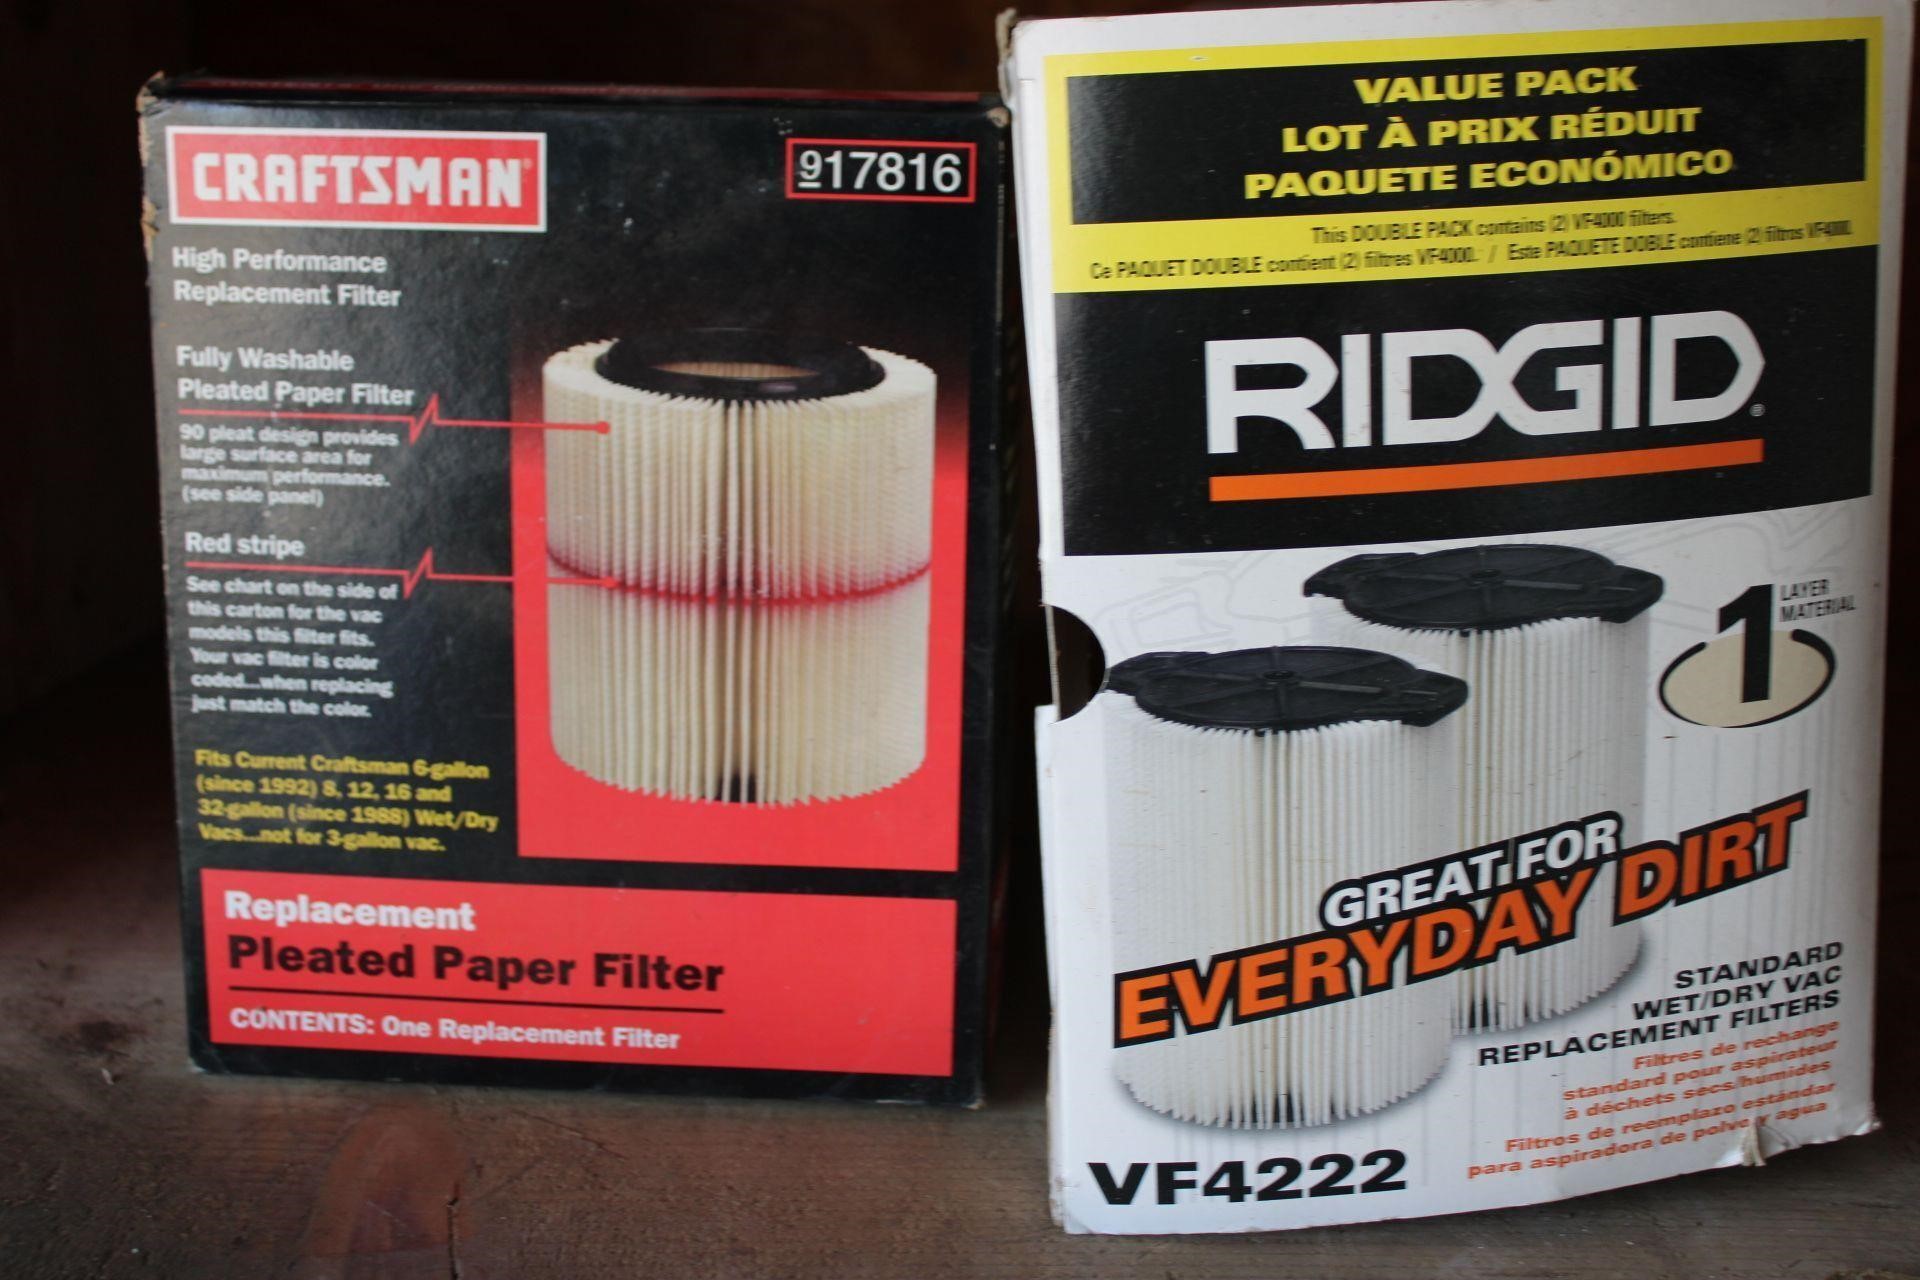 WET/DRY VAC FILTERS